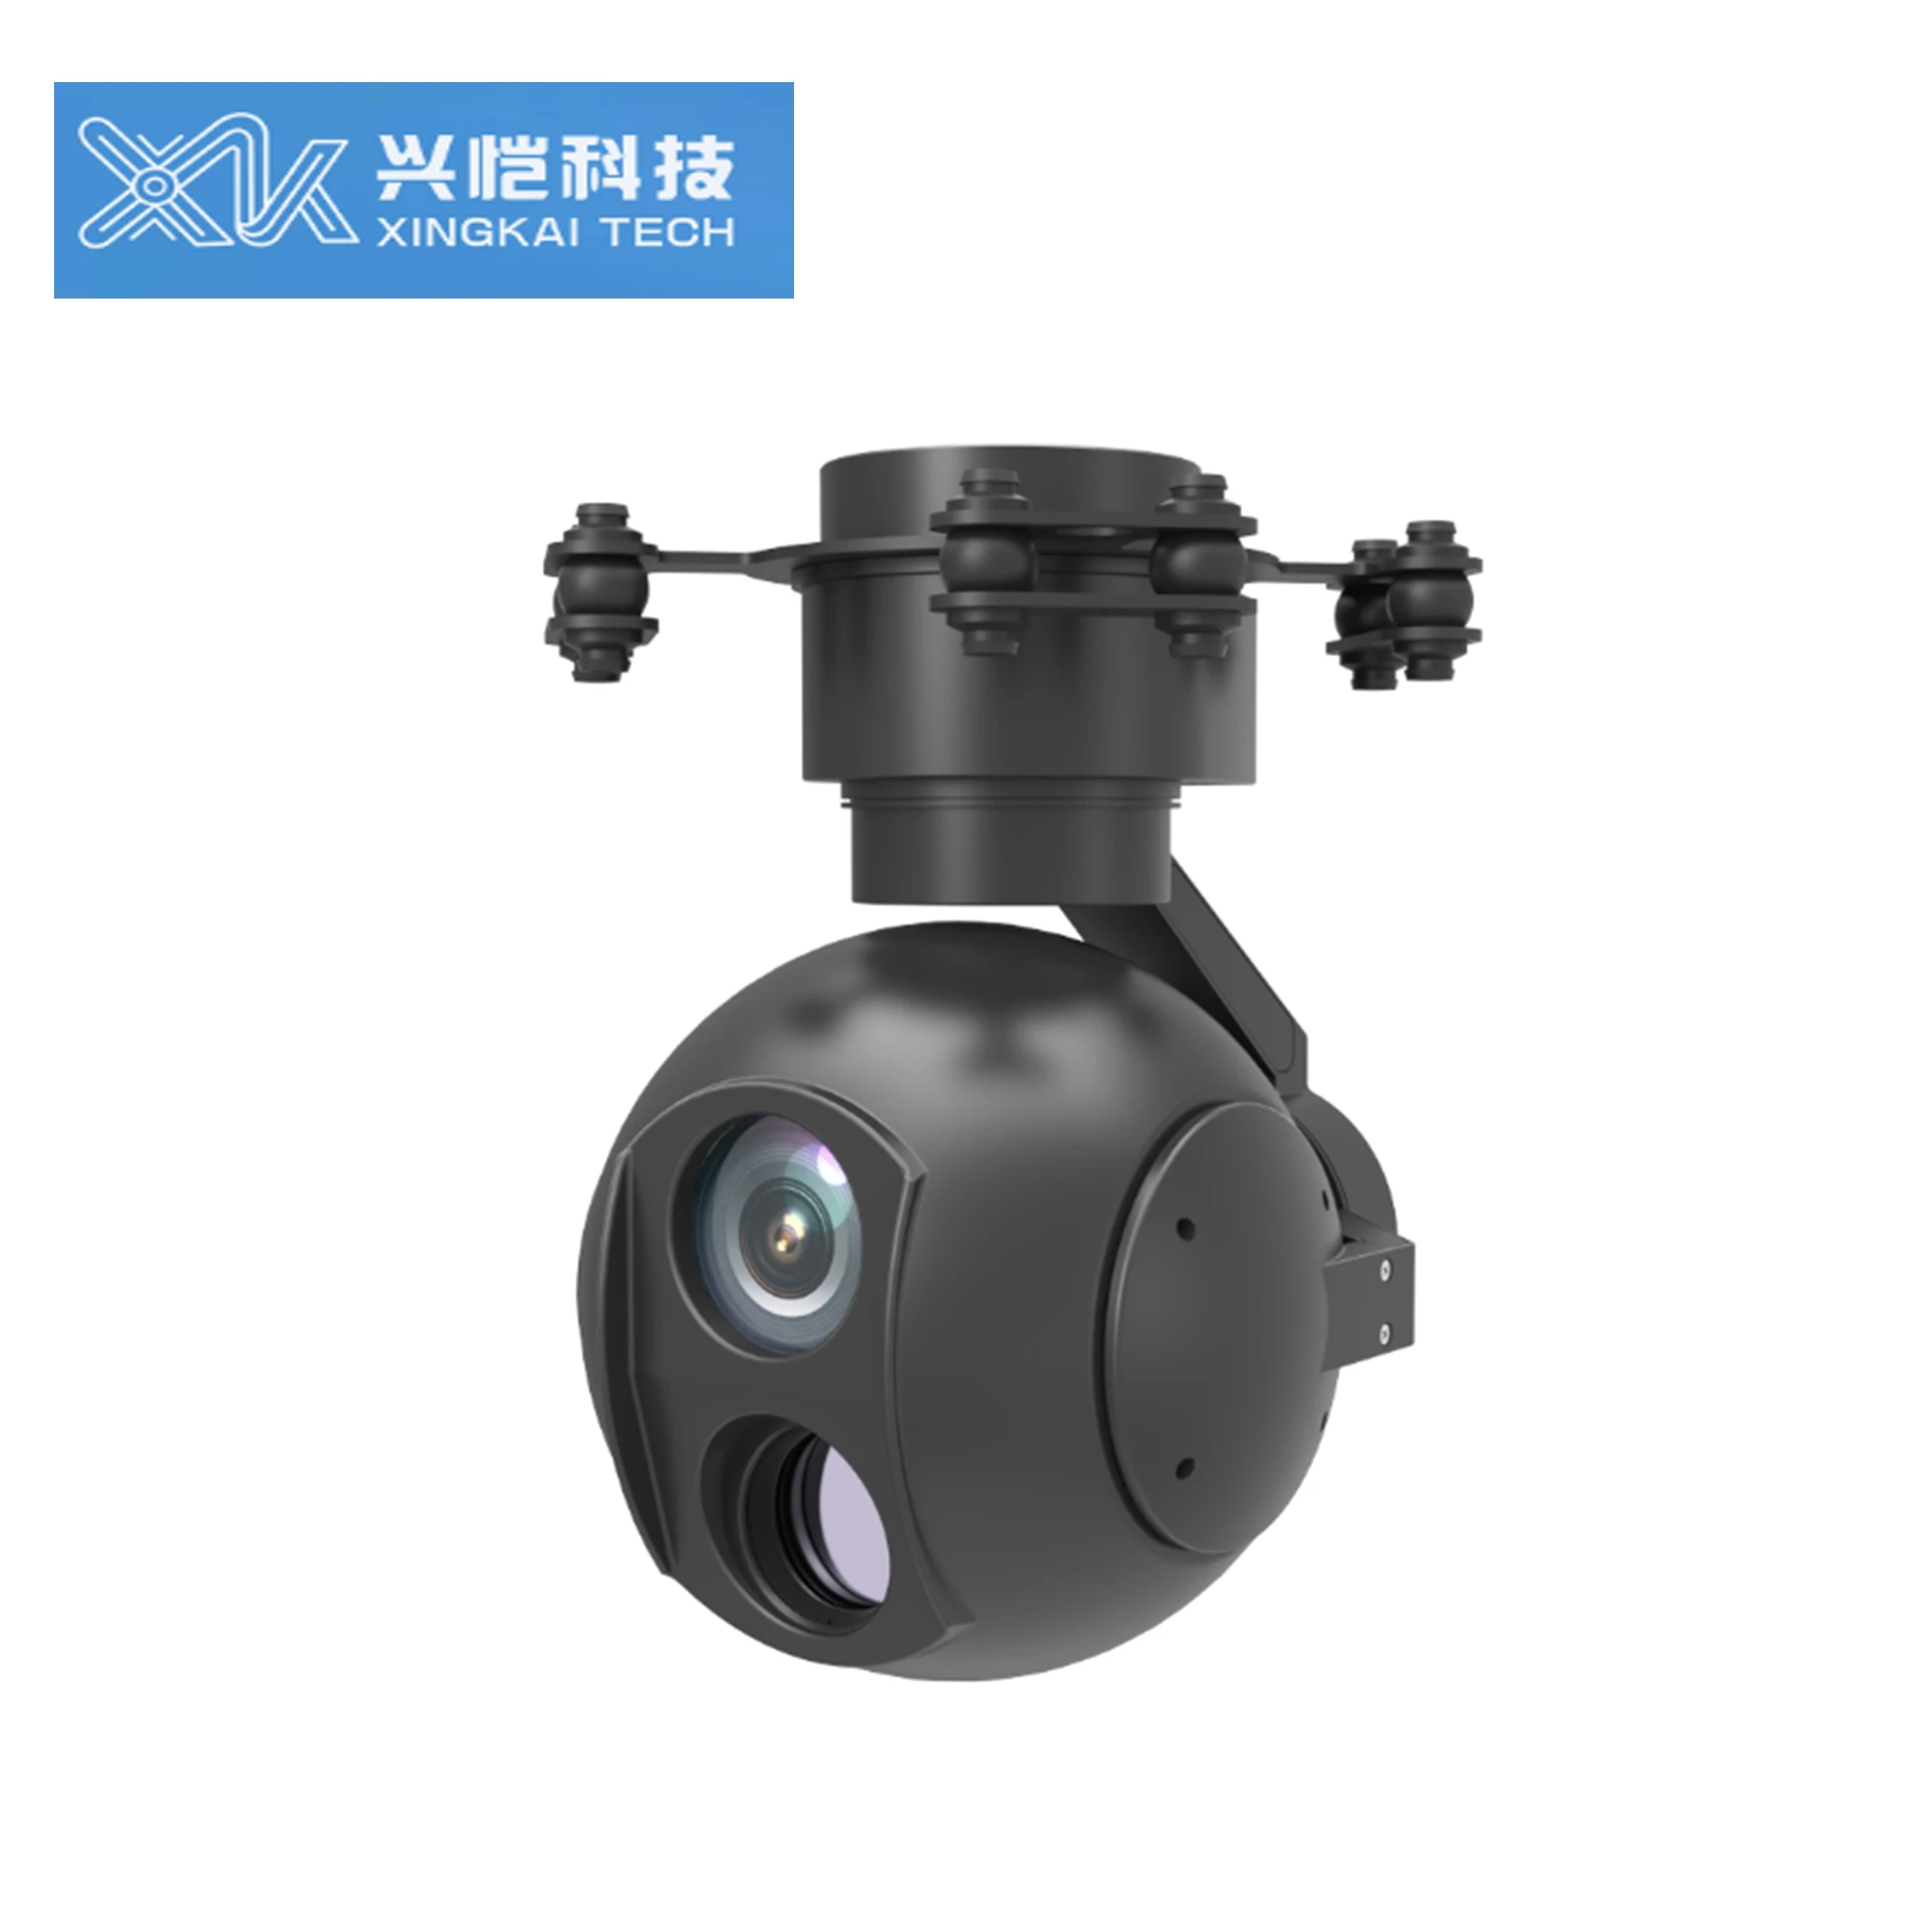 

30X Optical Zoom Dual Gimbal Camera For VTOL Uav Uas For Surveillance Object Tracking Thermal Camera With Ethernet HDMI SDI